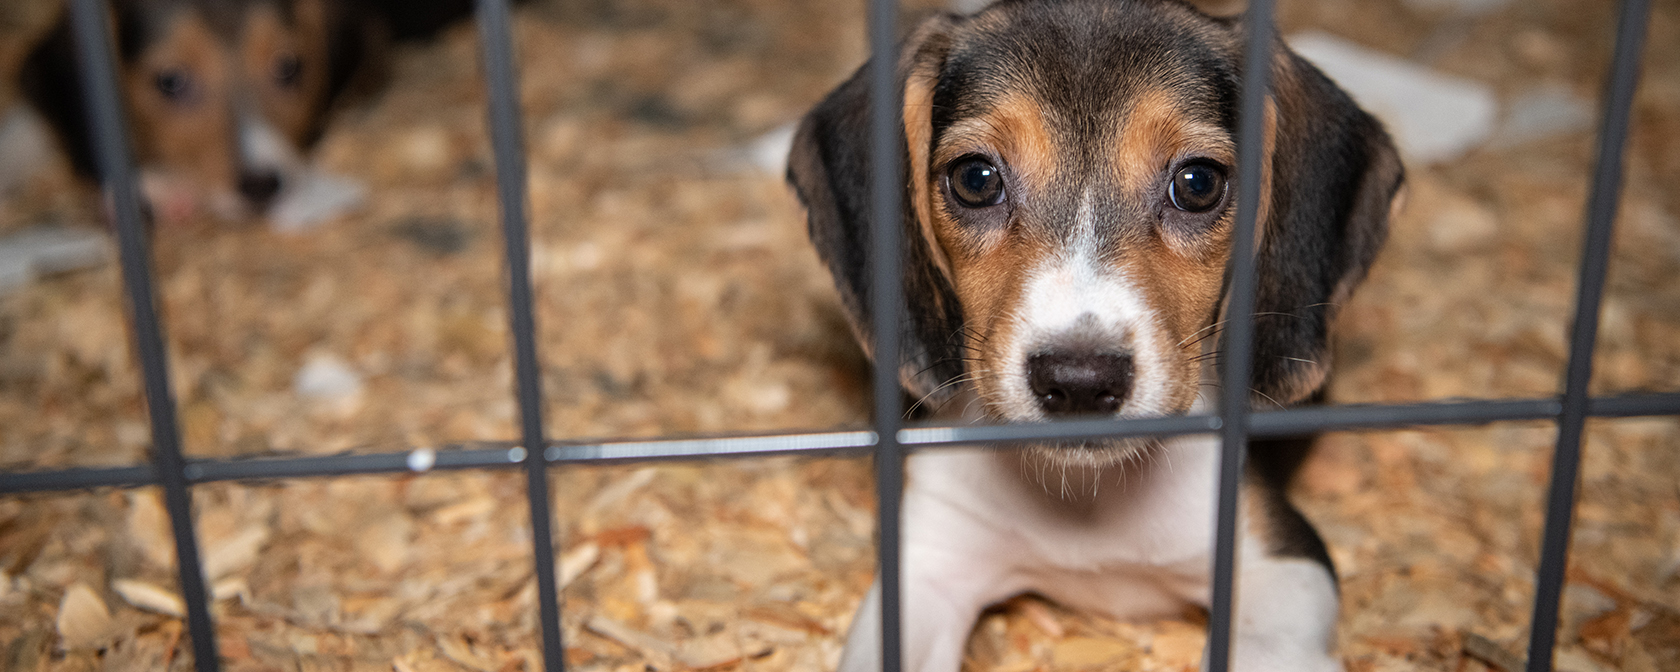 Win! Illinois bans unnecessary toxicity tests on dogs and cats